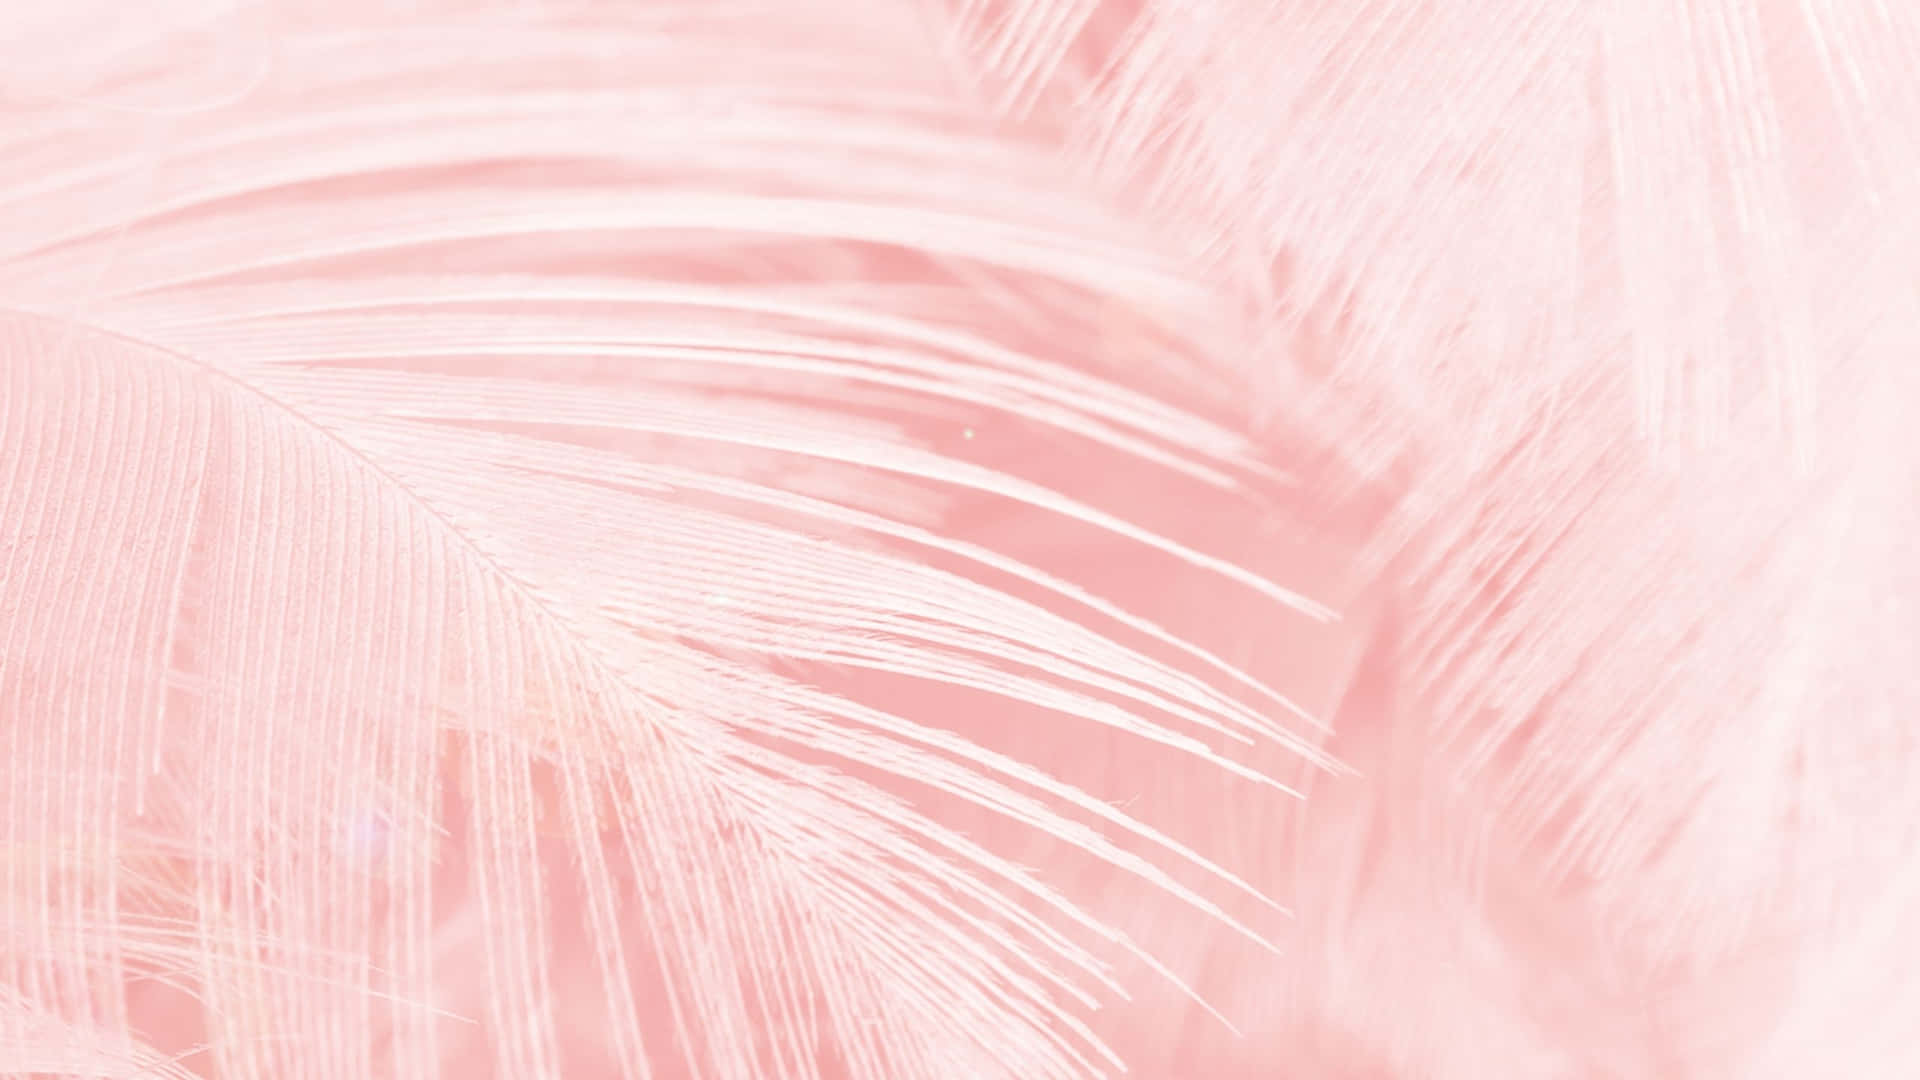 Aesthetic Puter Light Pink Feathers Wallpaper